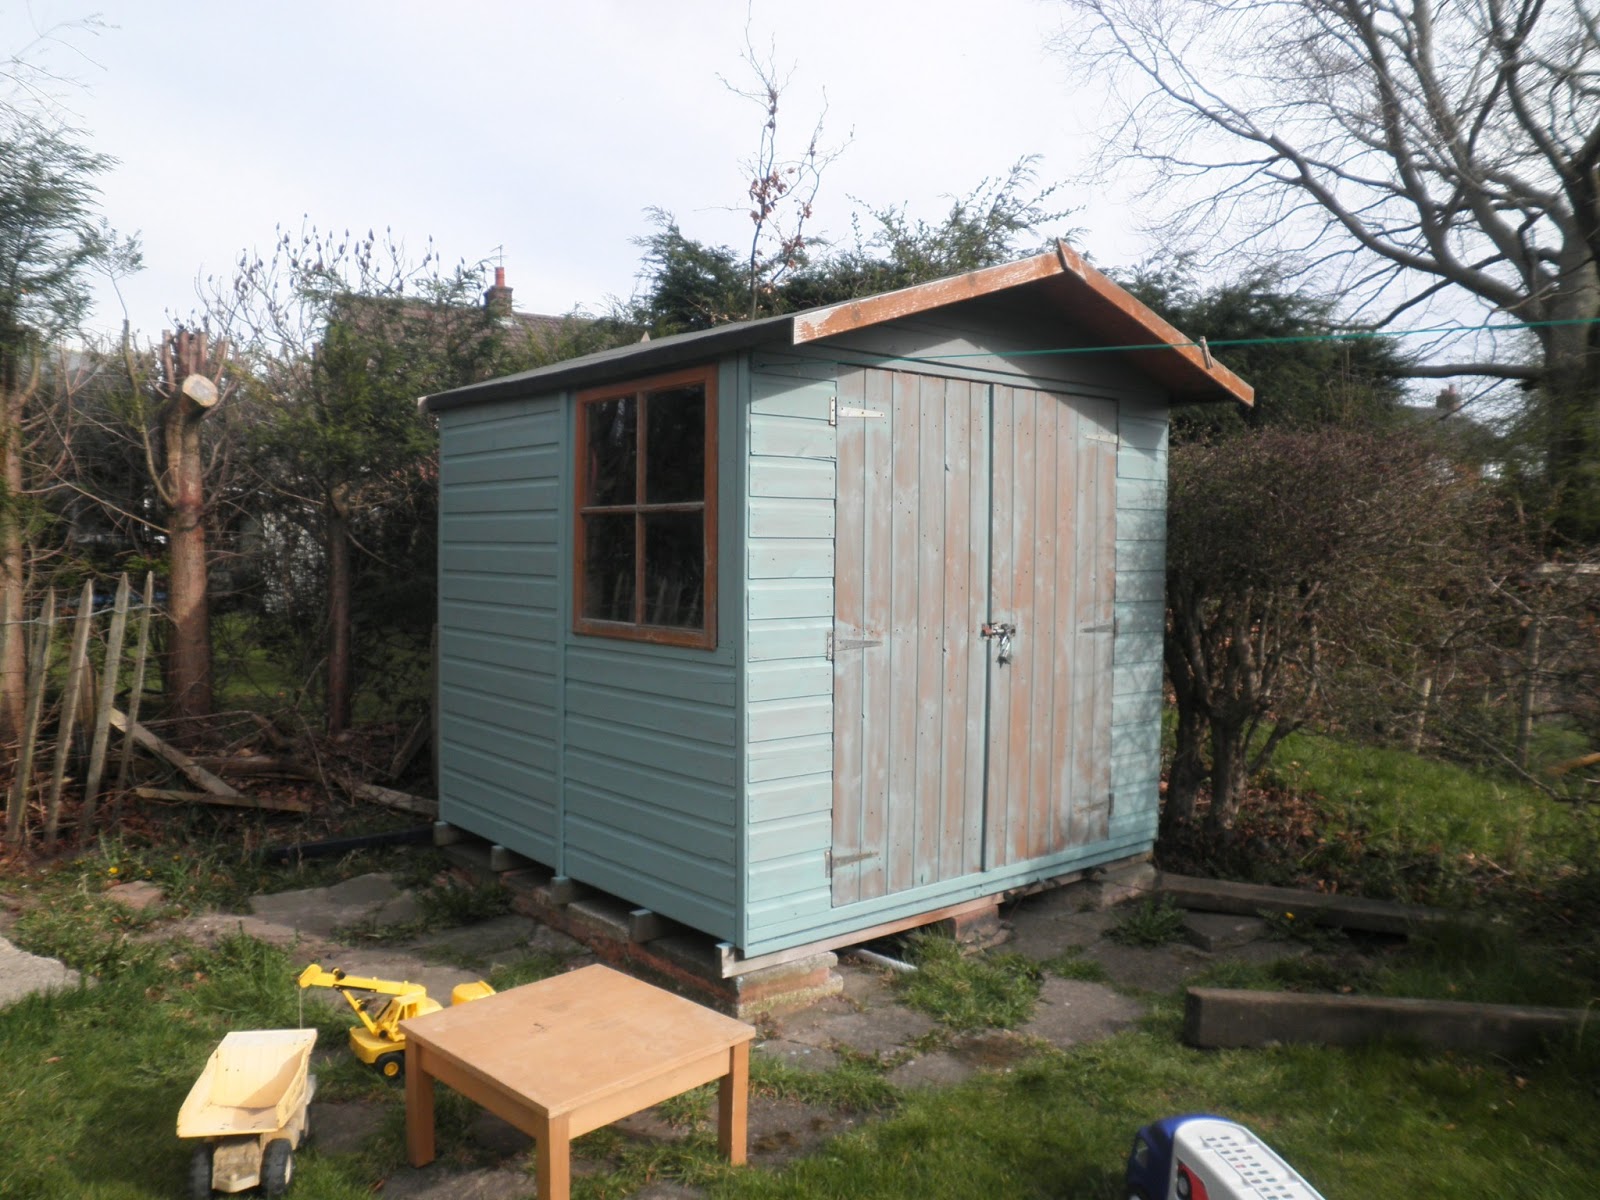 Garden shed designs photos, how to build a 12x12 shed plans, making a 